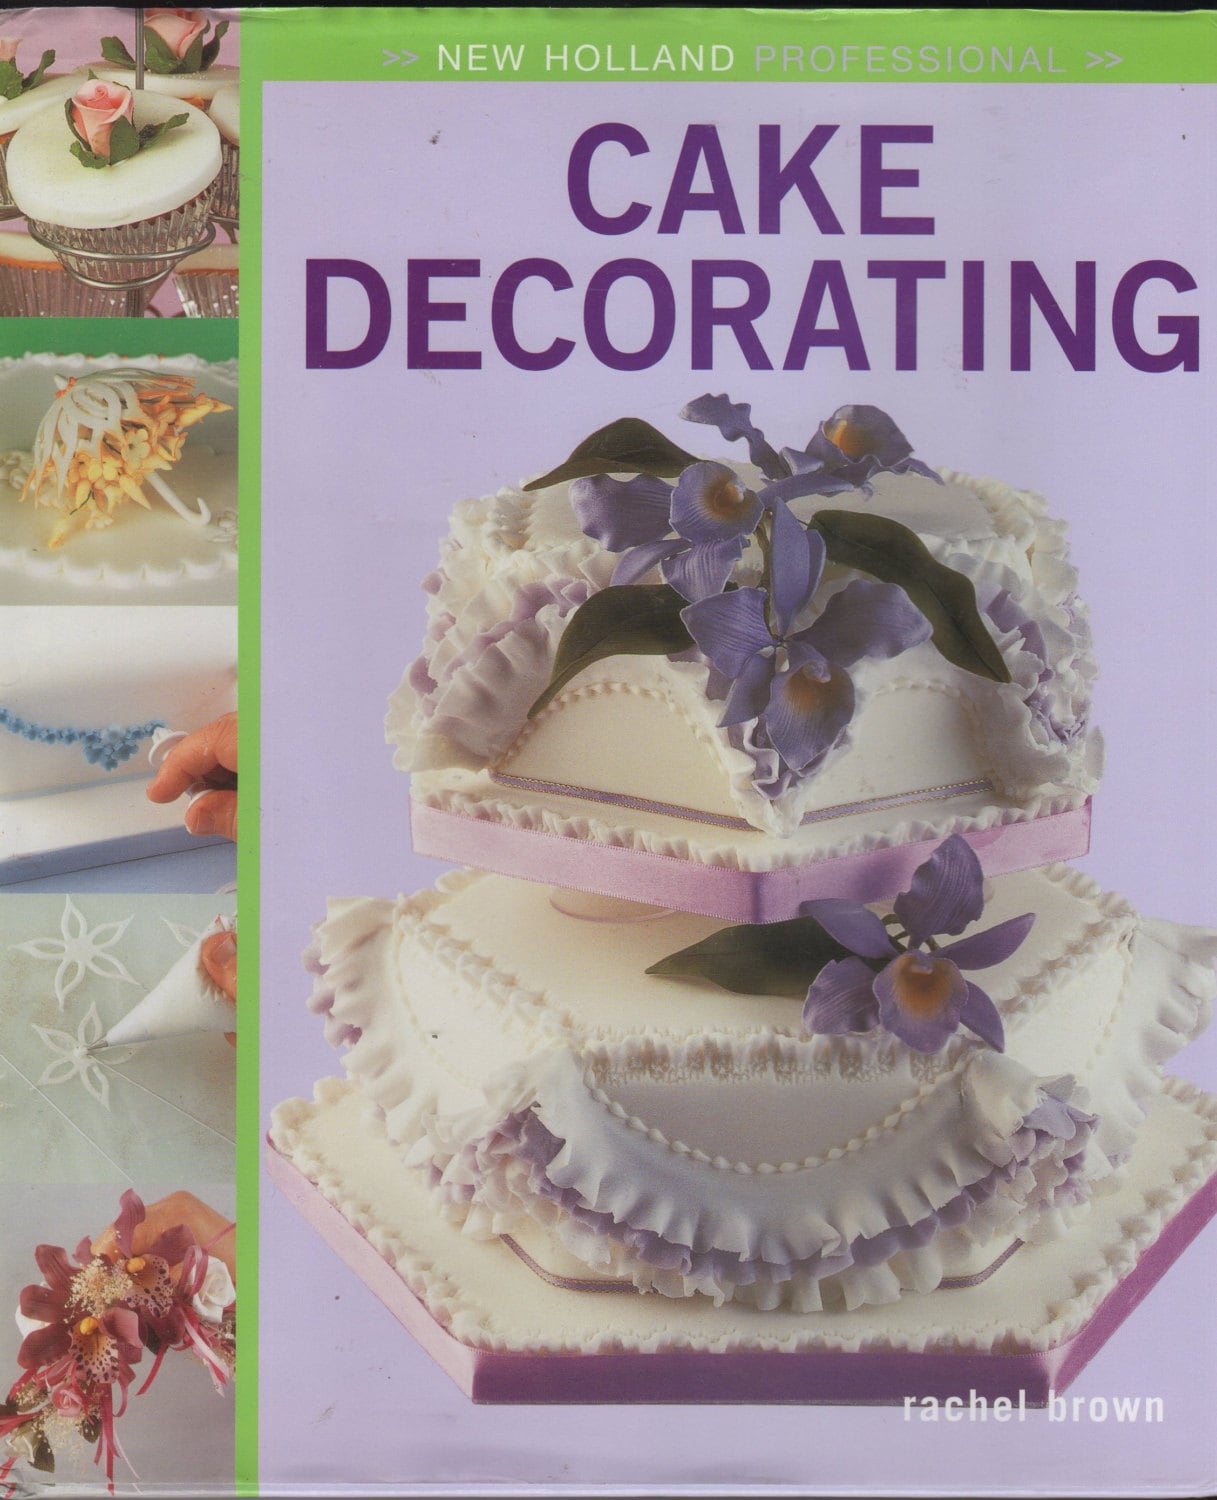 New Holland Professional Cake Decorating Book by Rachel Brown